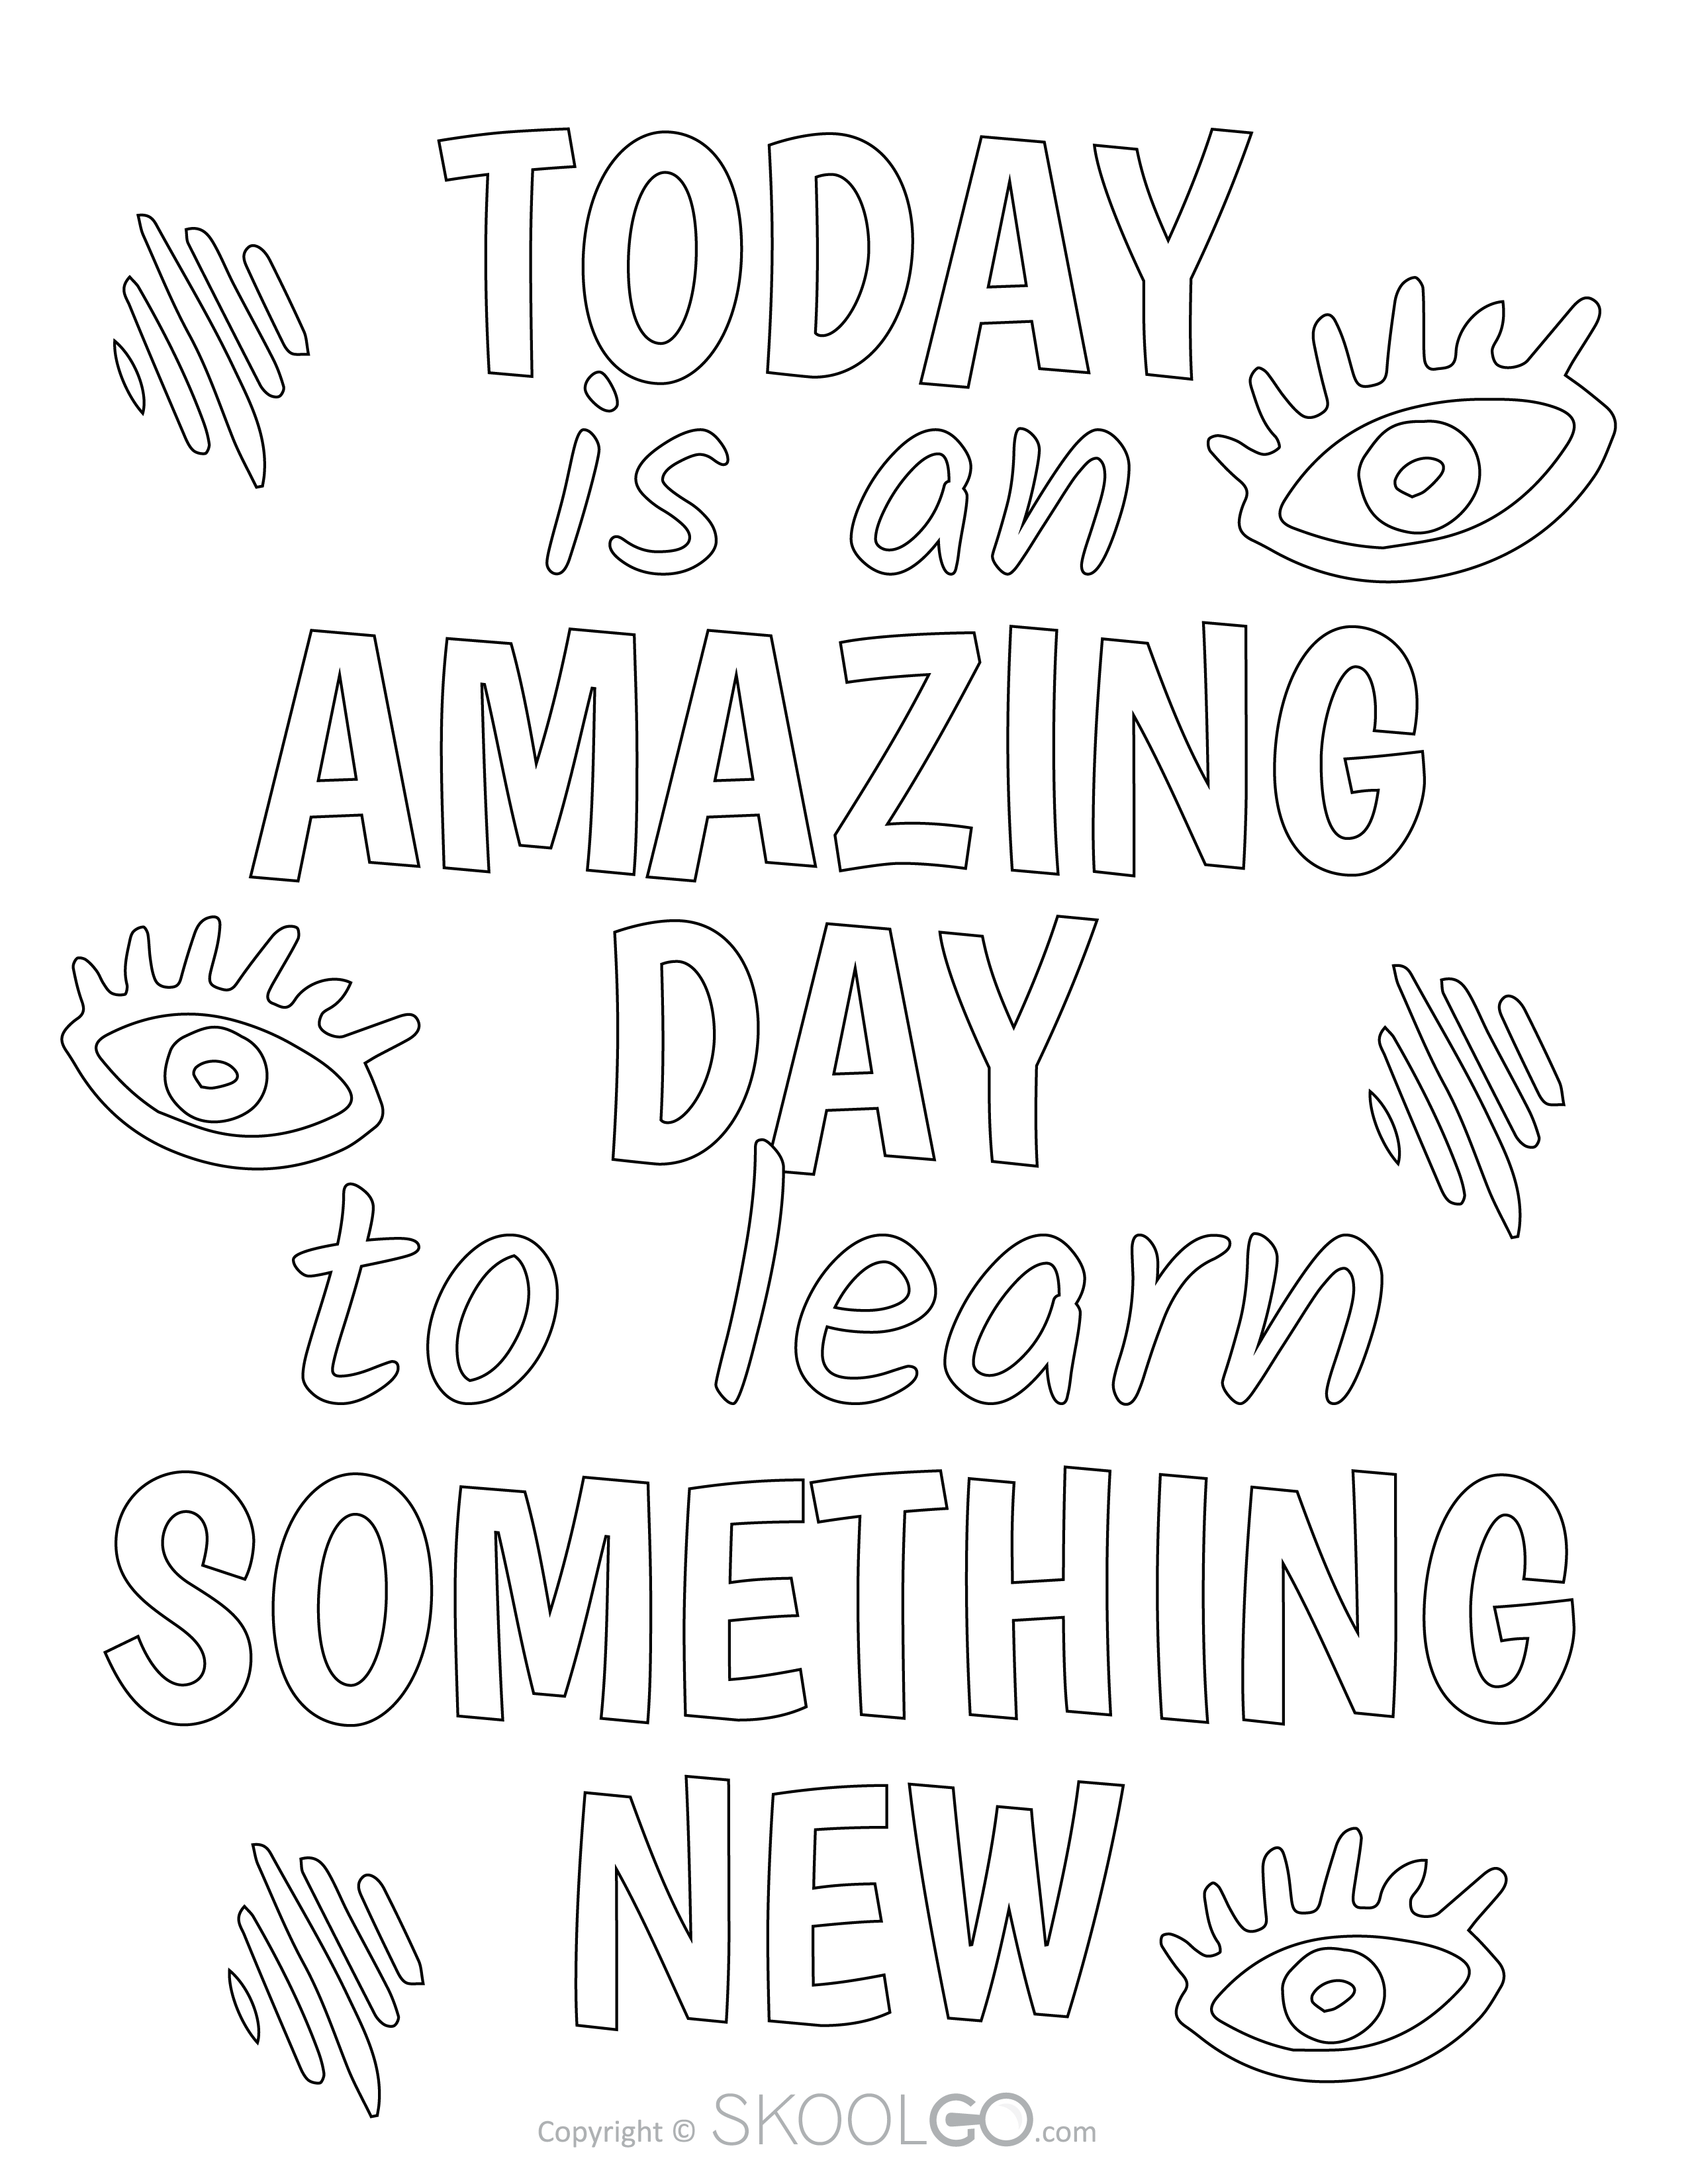 Today Is An Amazing Day To Learn Something New - Free Coloring Version Poster